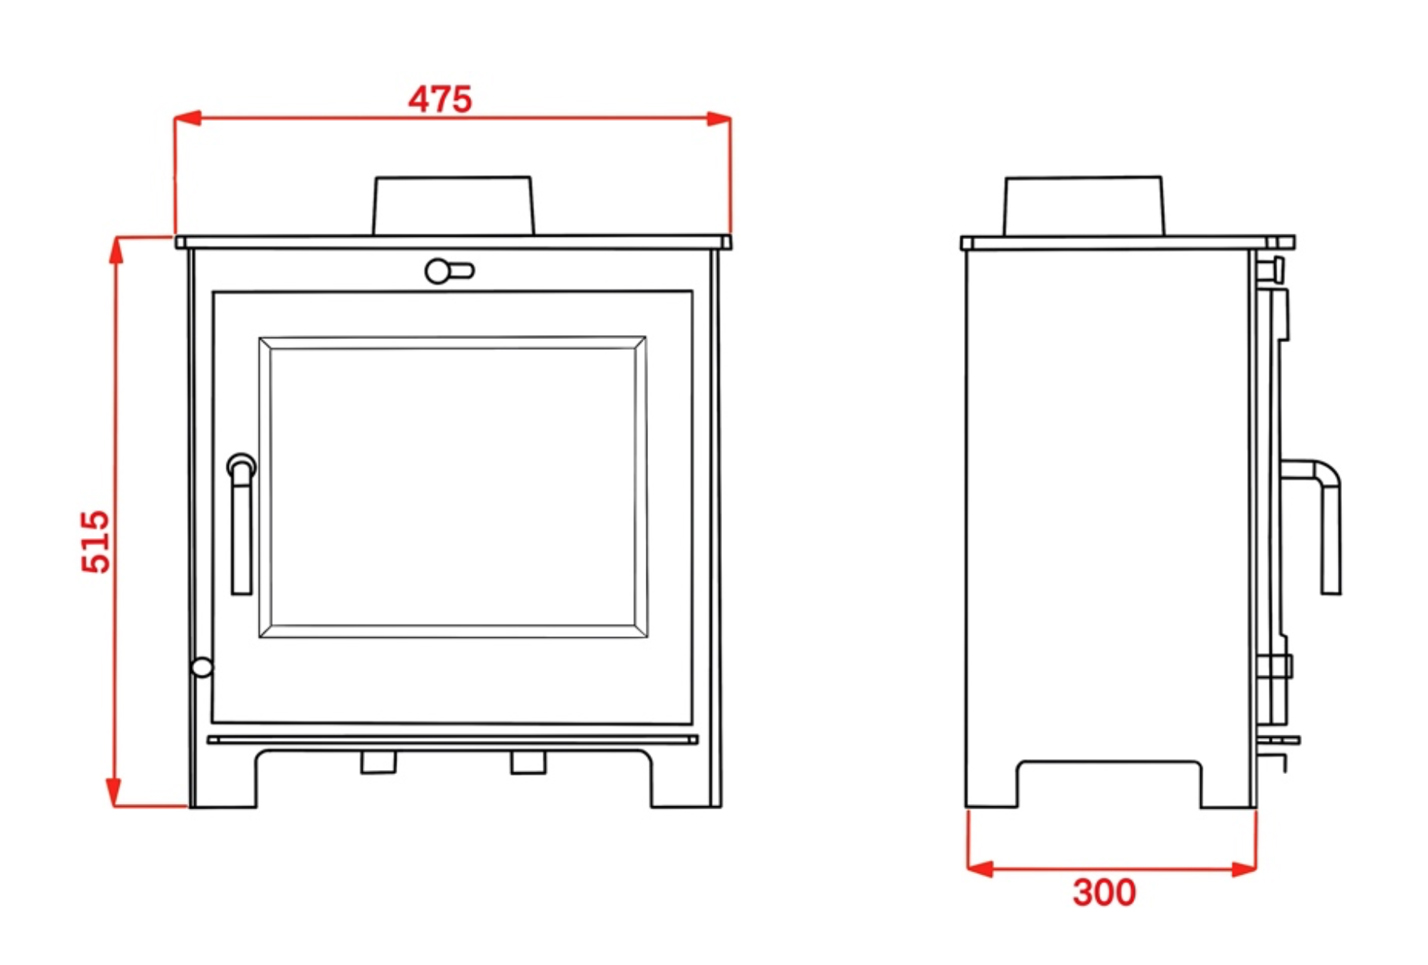 Woolly Mammoth 5 Widescreen Stove Dimensions